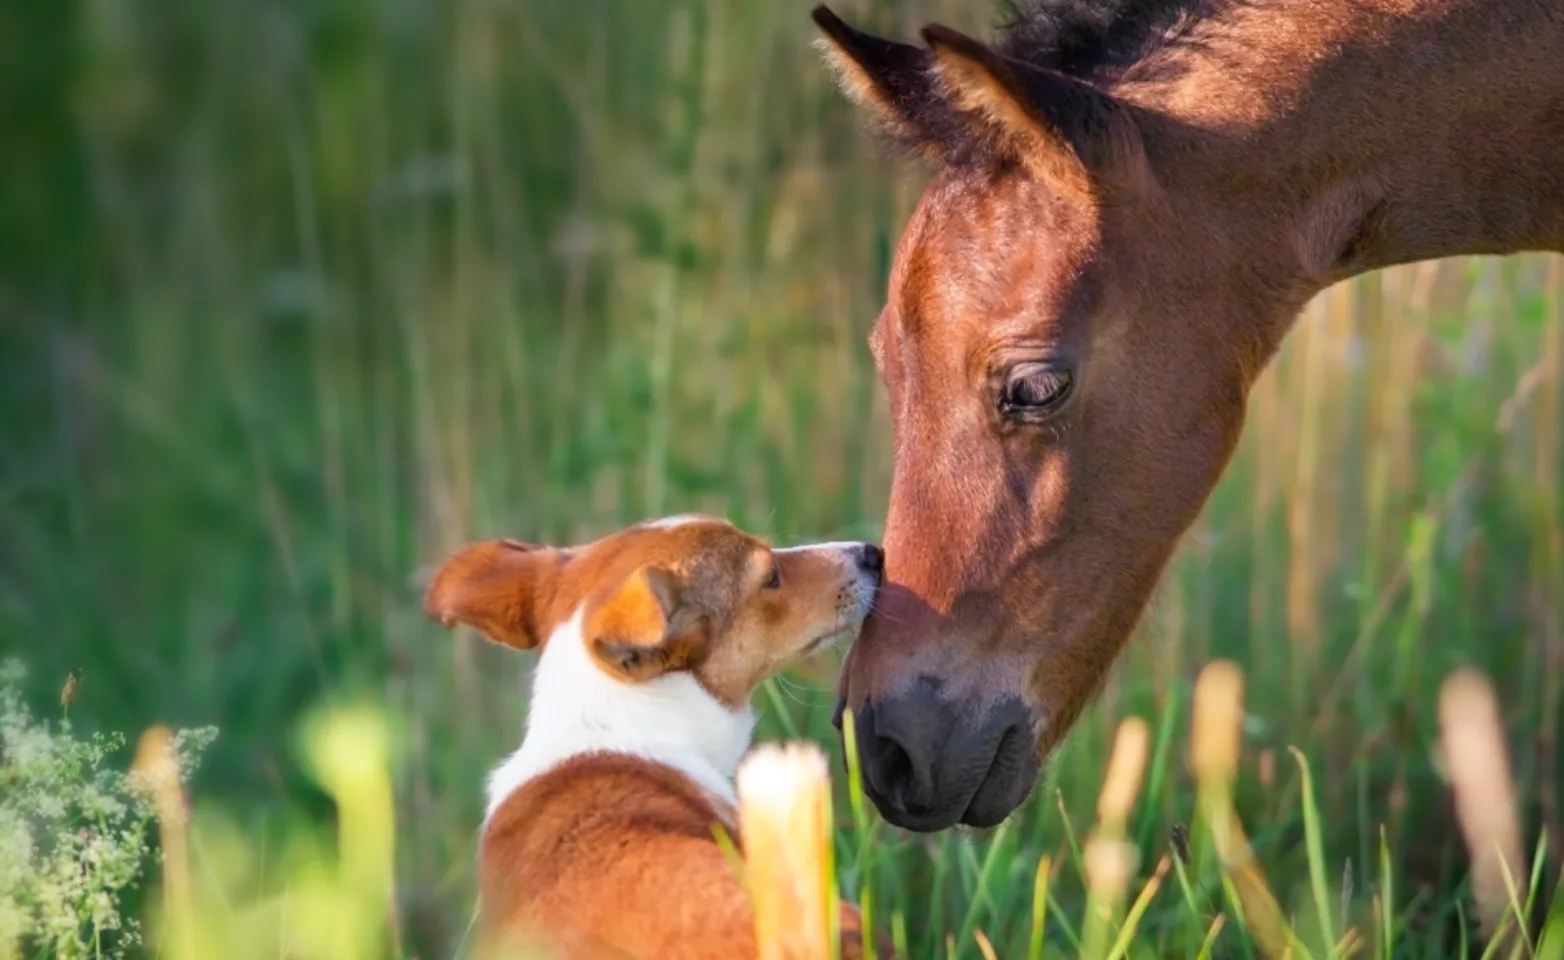 Dog and horse with each other sniffing each others noses